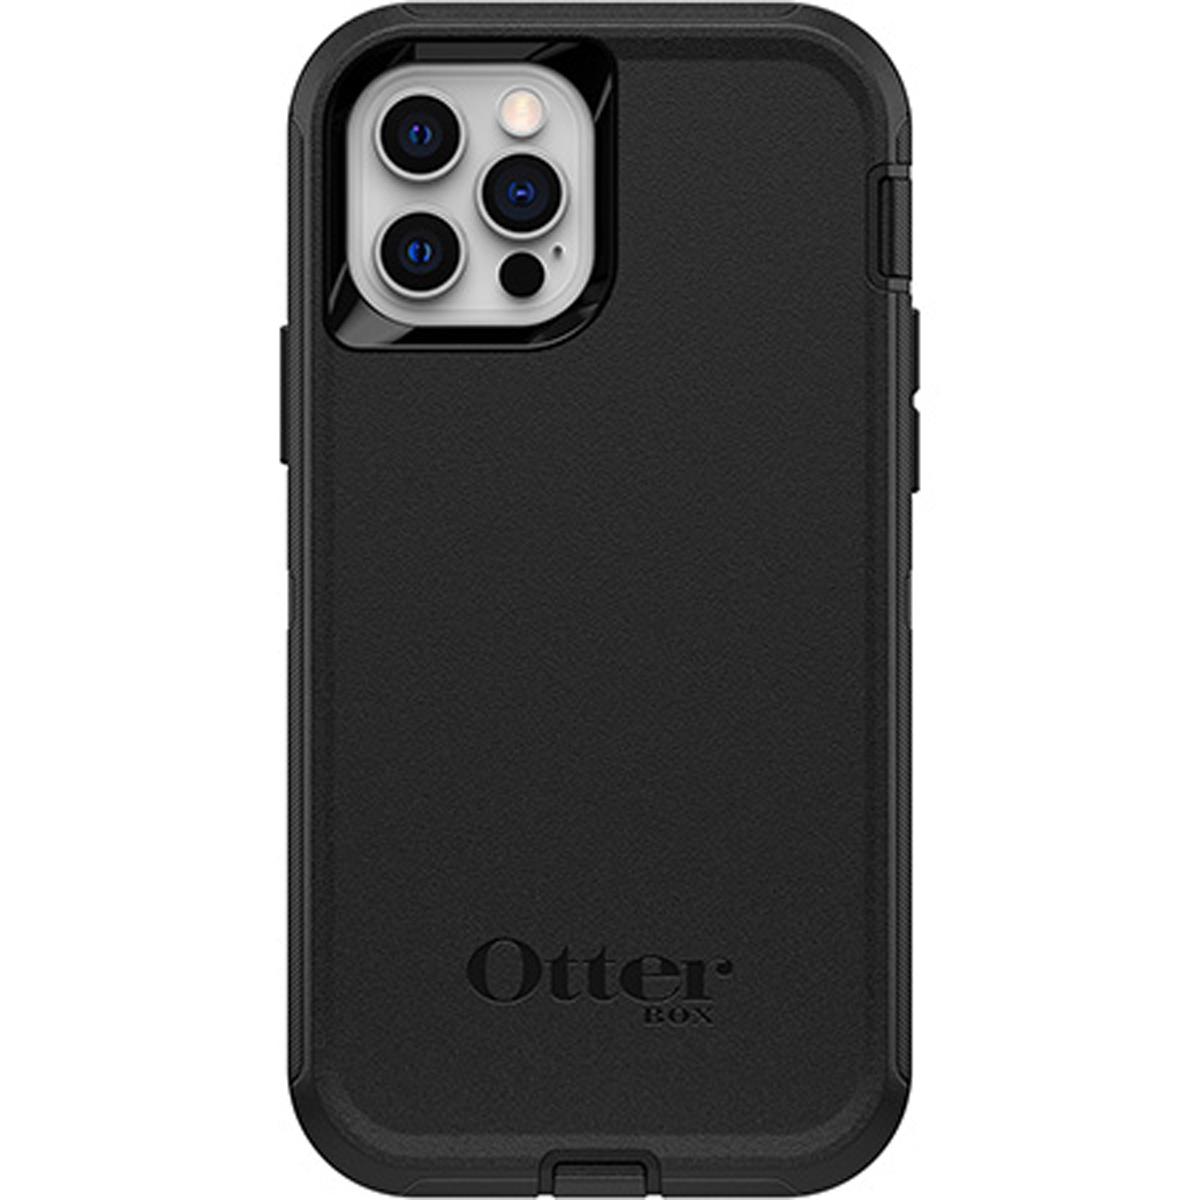 Image of OtterBox Defender Series Case for Apple iPhone 12/iPhone 12 Pro